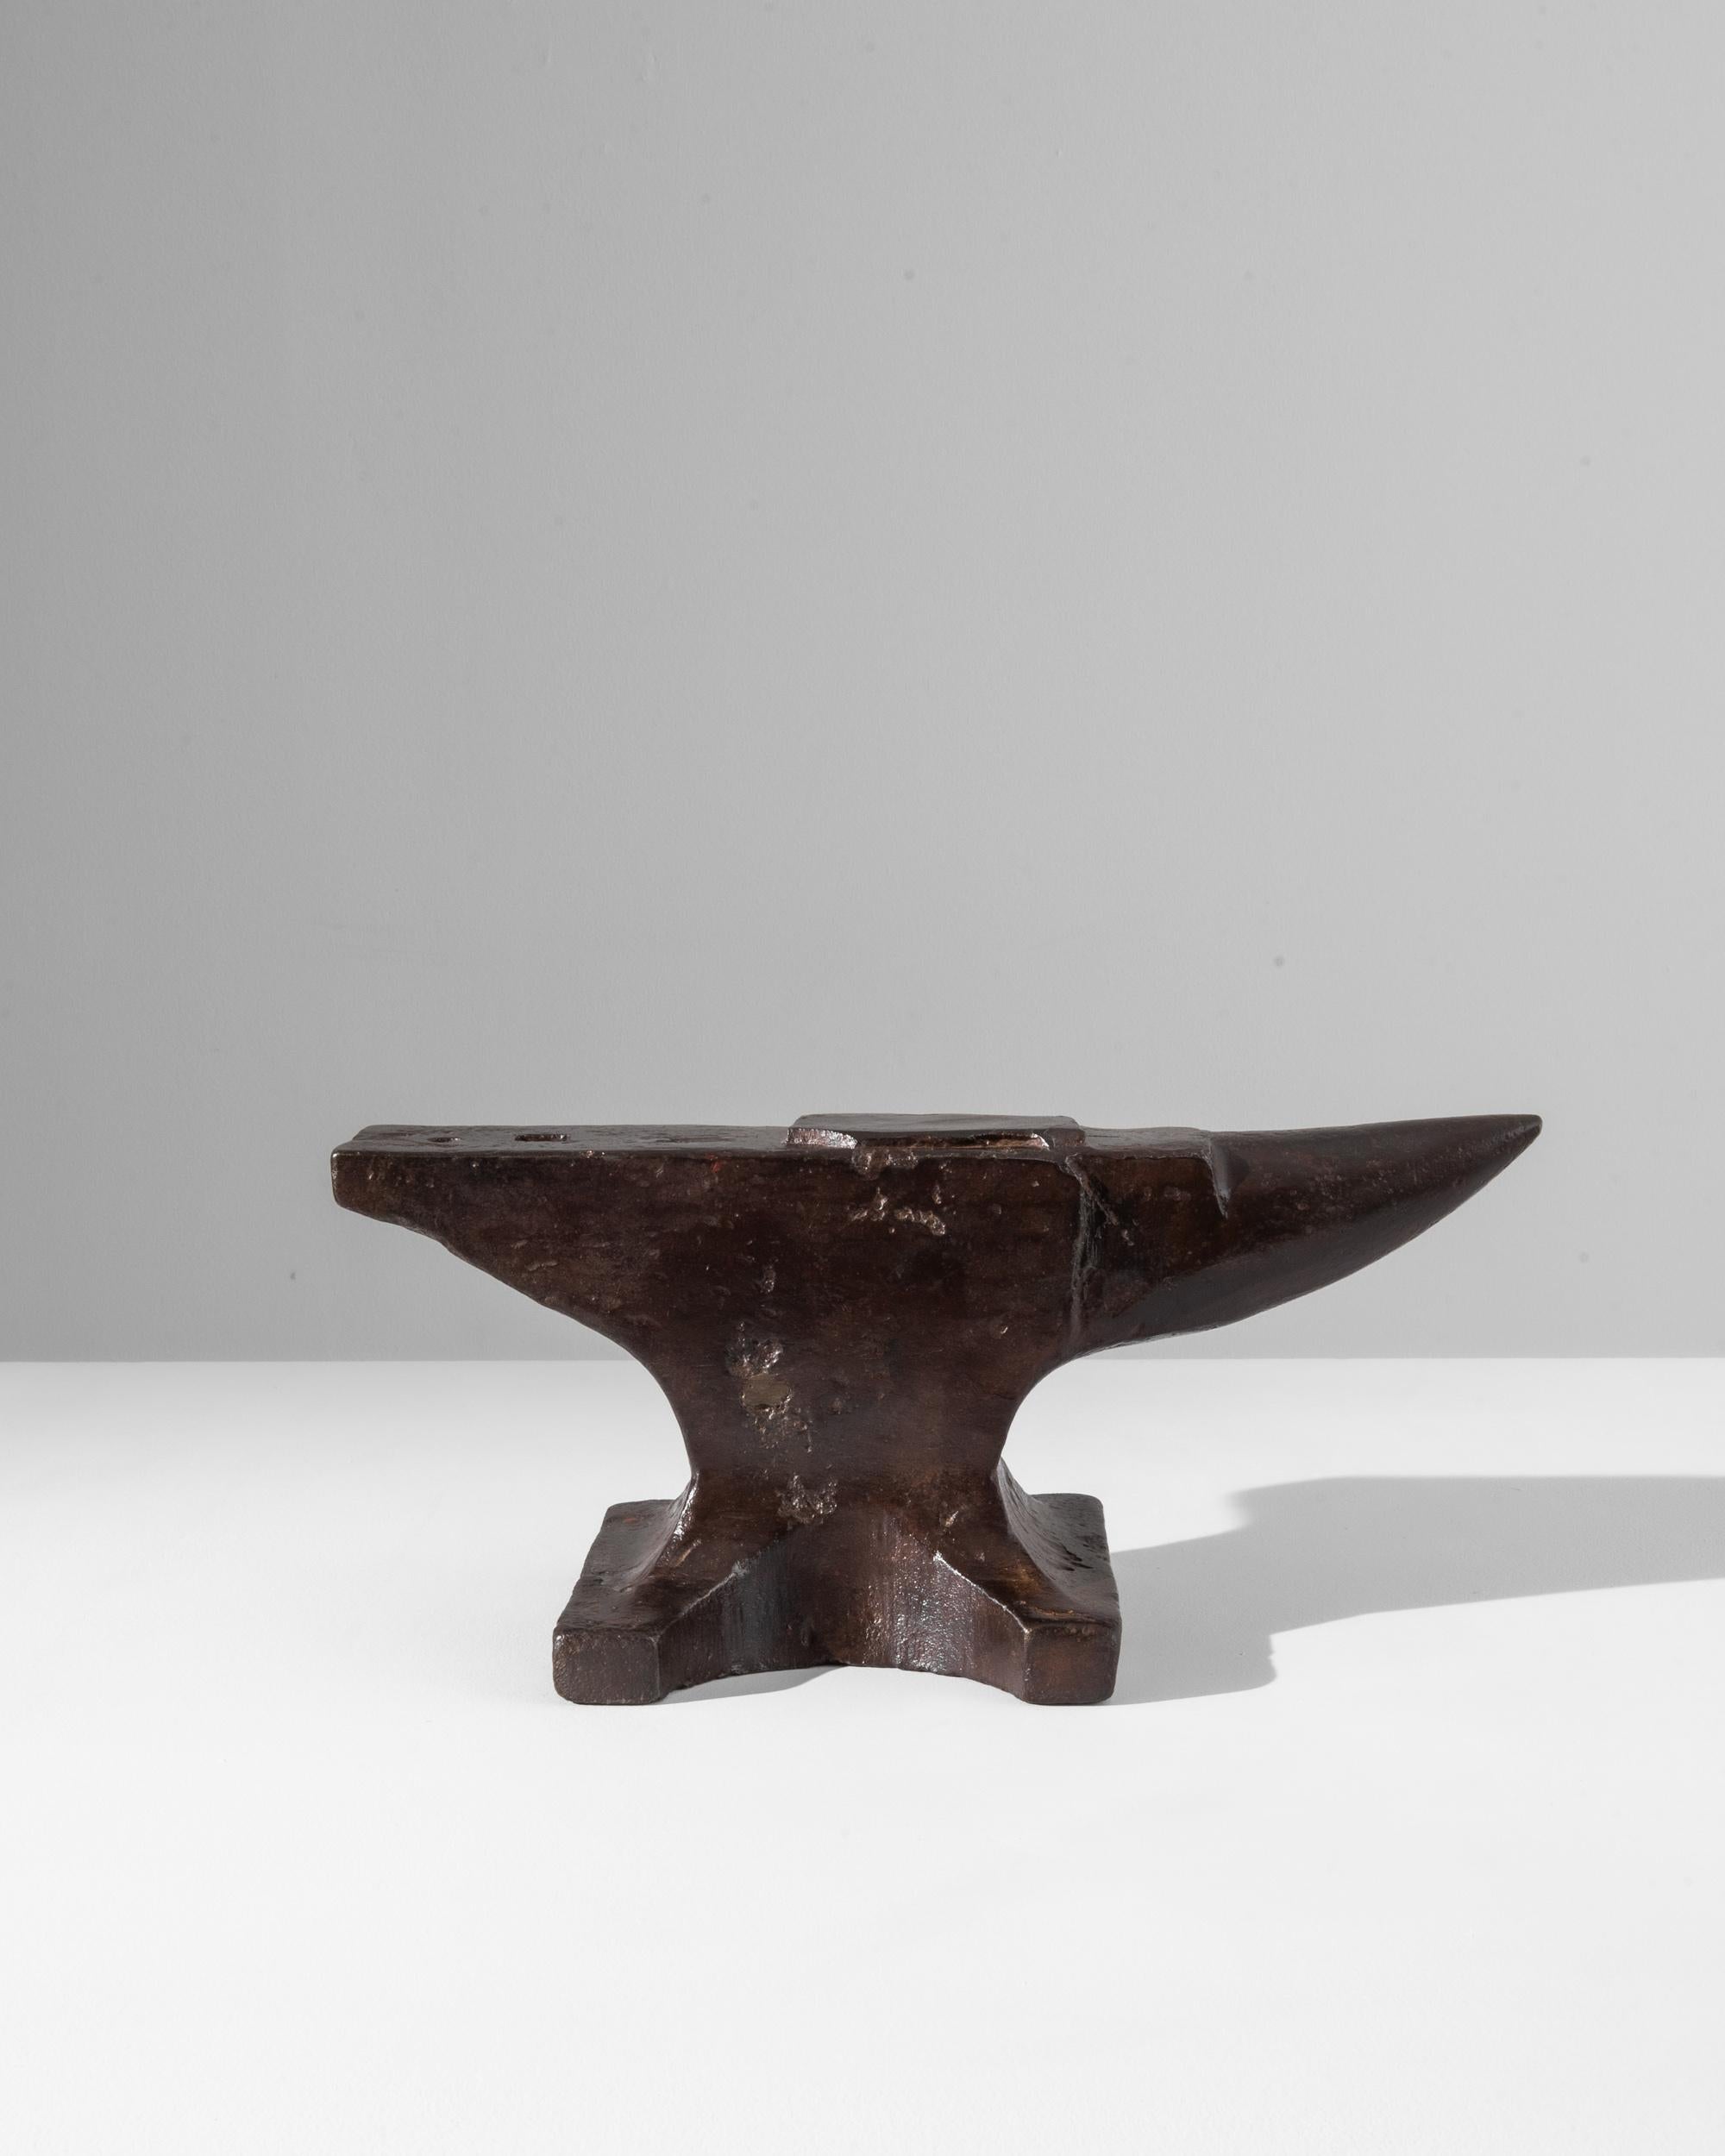 A turn of the century iron anvil produced in France, this peculiar antique exhibits the sheen of an age-old patina. Polished by beaten metal and industrious hands, the iron displays an intense brown tone with a ruby gleam, contrasted by